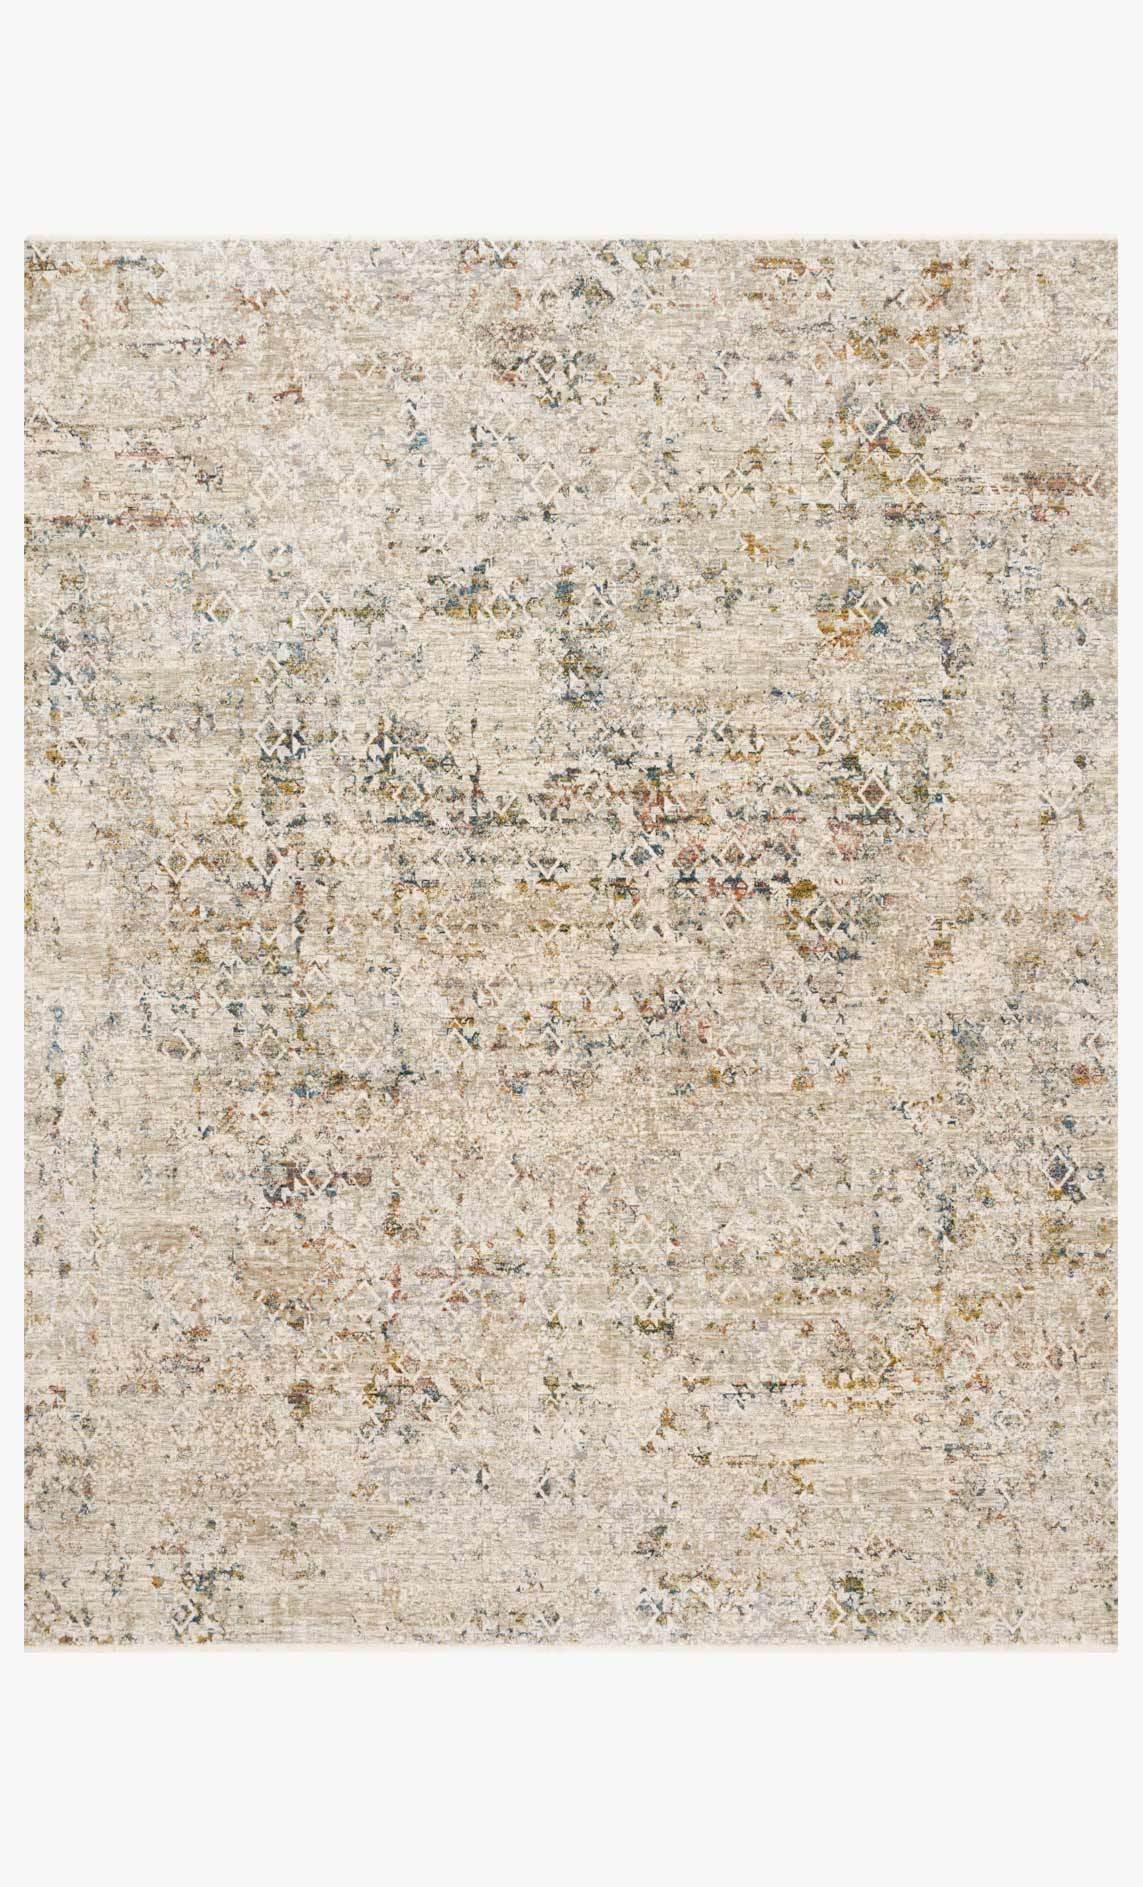 THE-04 Multi / Natural Rug, 6'7"x9'6" - Image 0